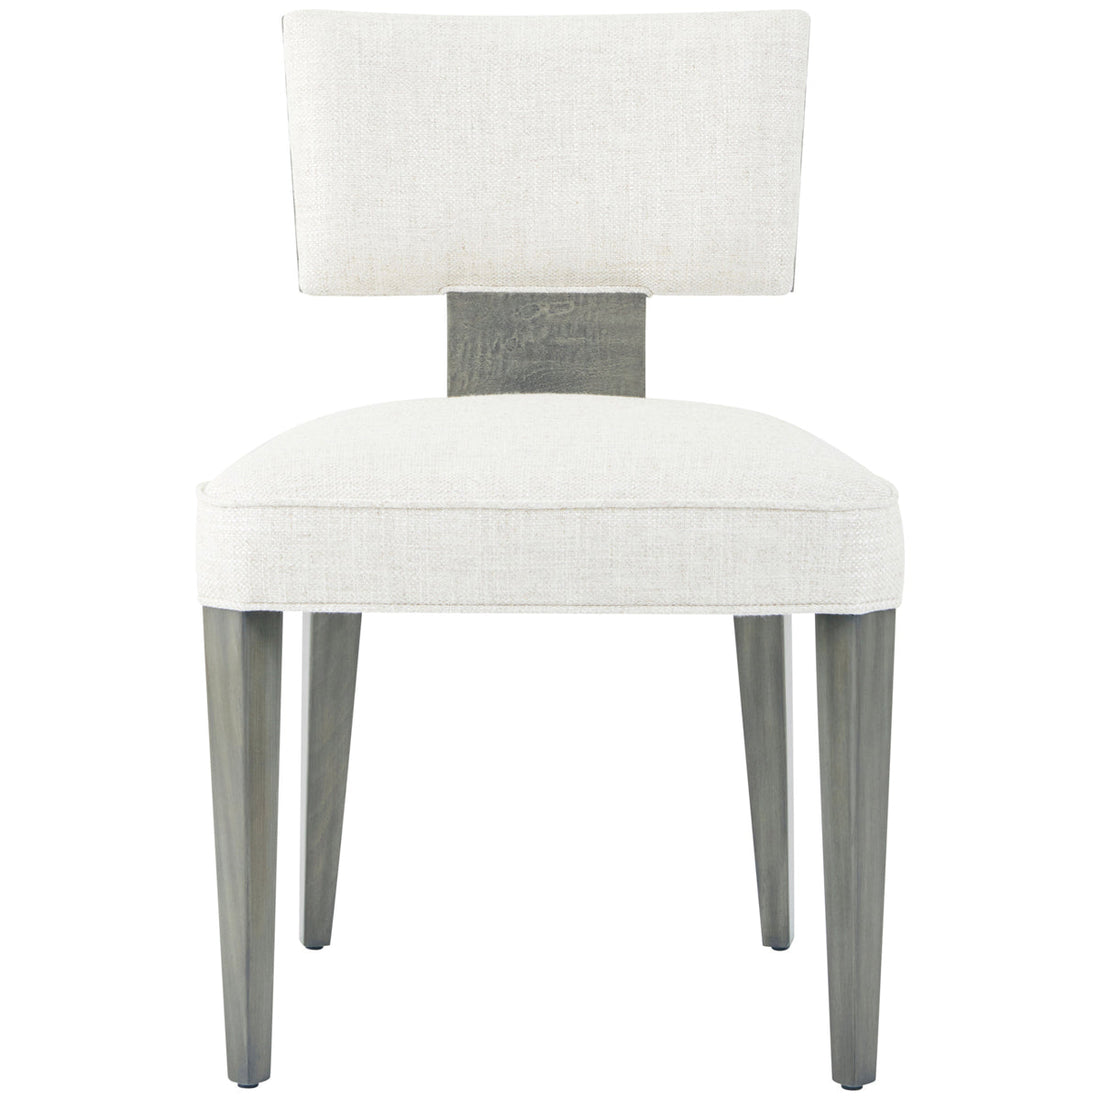 Theodore Alexander Hudson Dining Side Chair, Set of 2